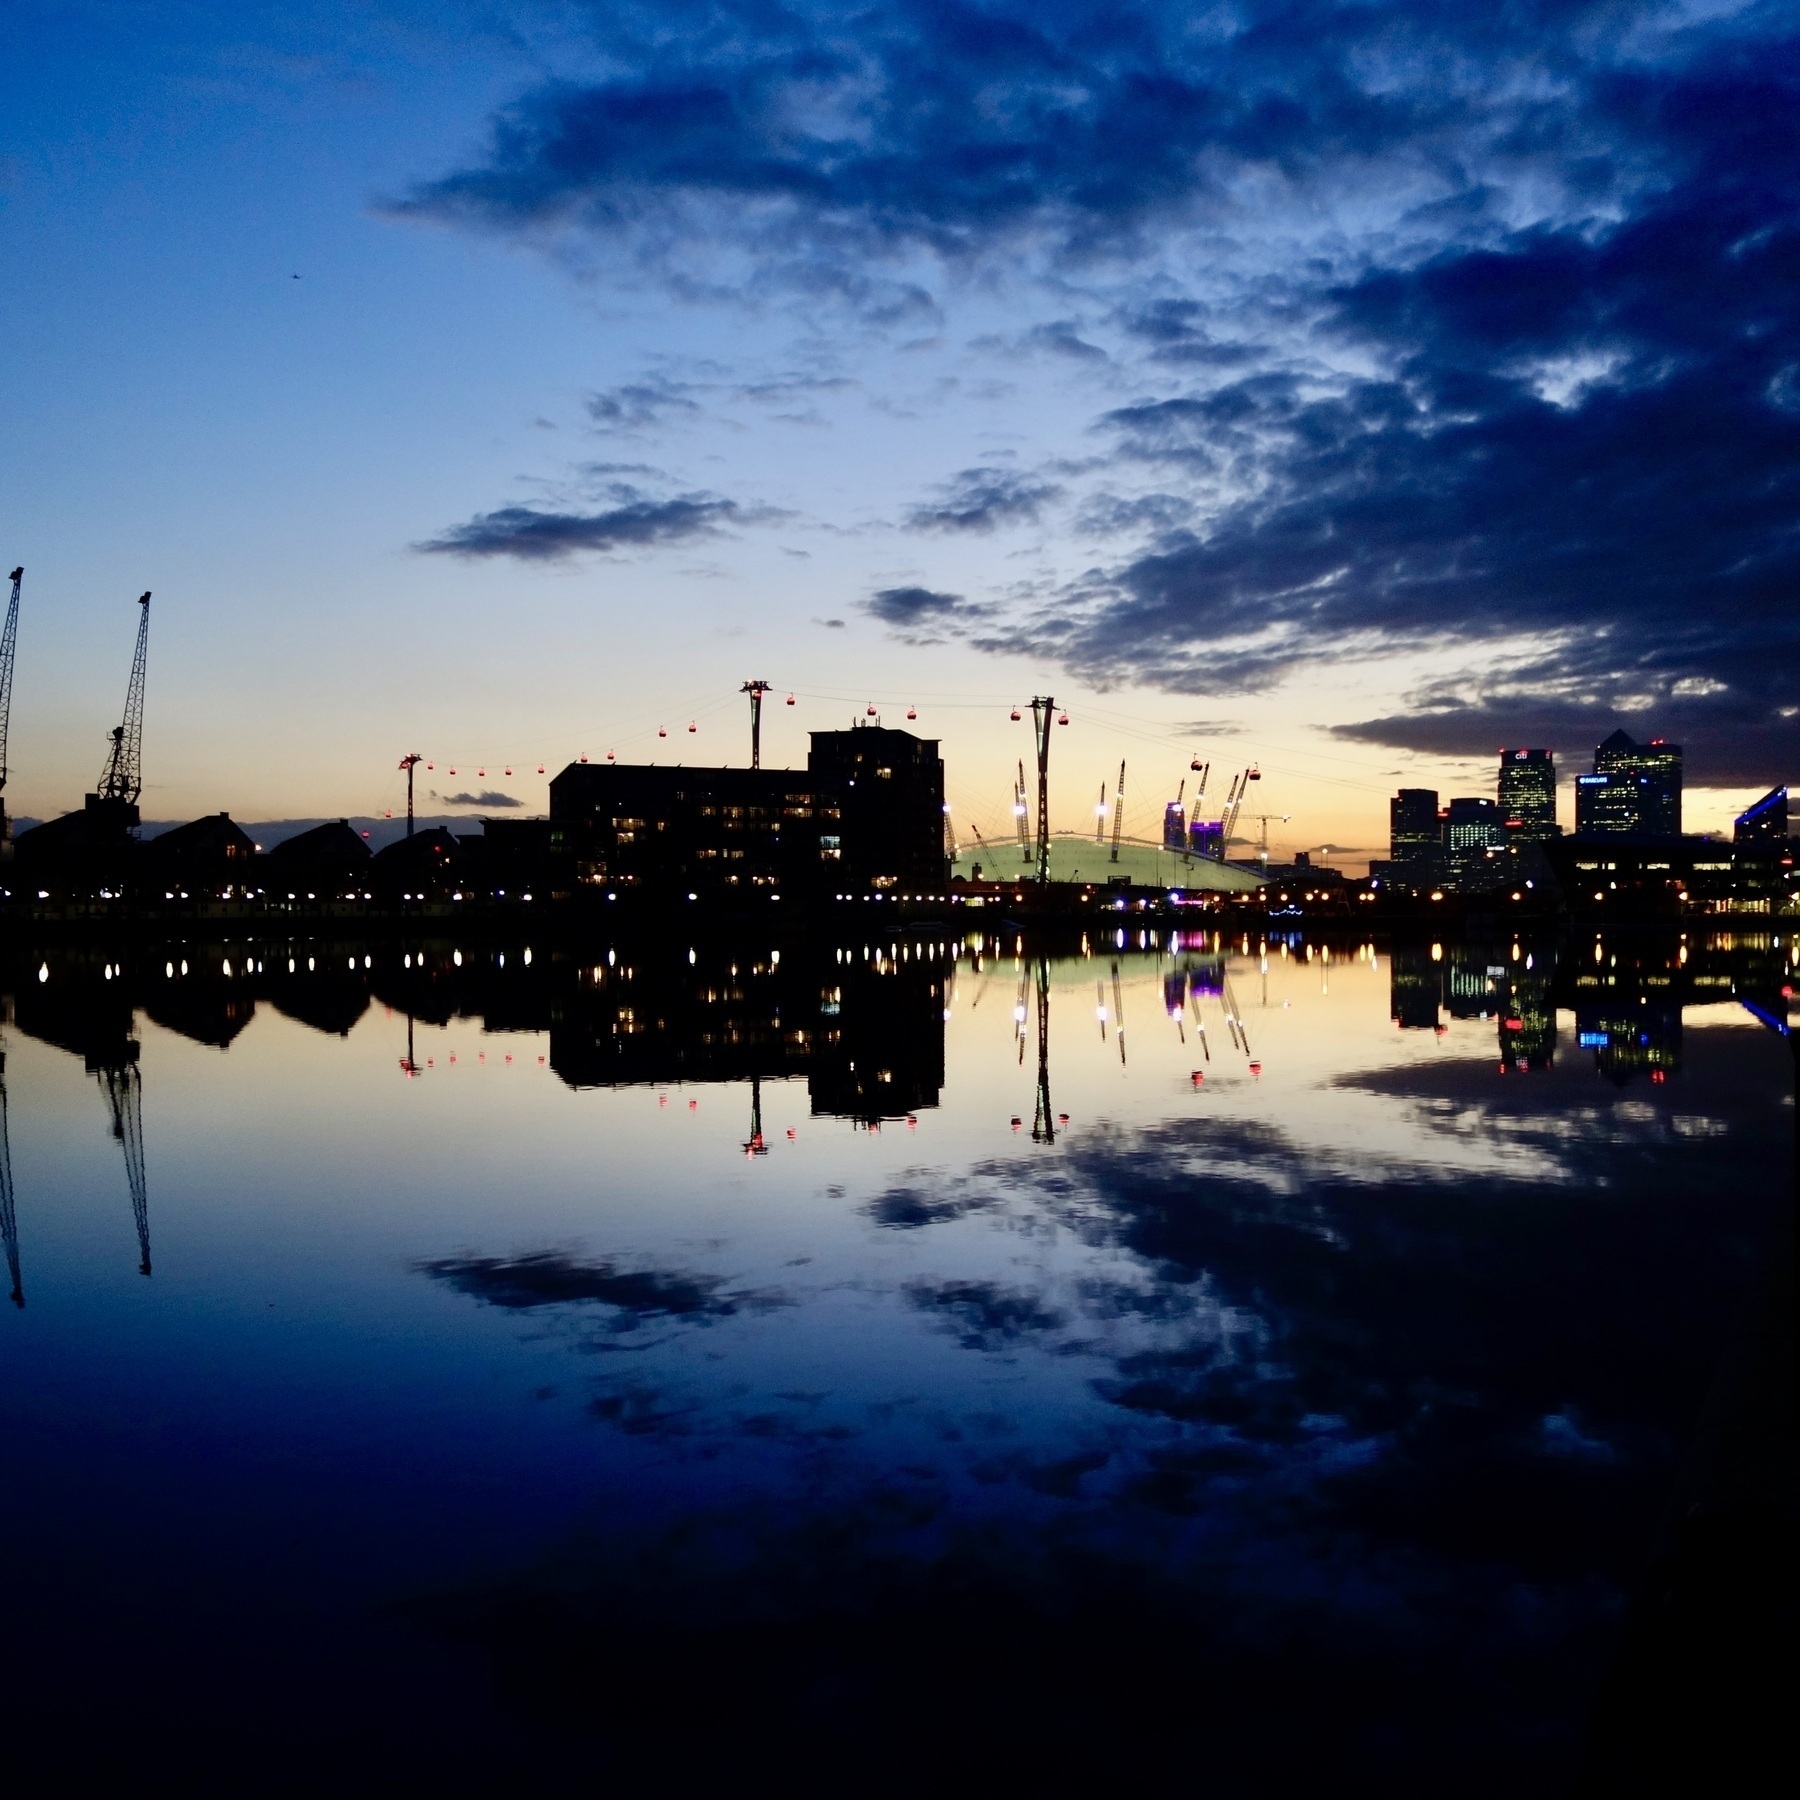 Dusk at the Royal Docks in East London, light fading from blue to yellow at the horizon, and buildings reflected in the water